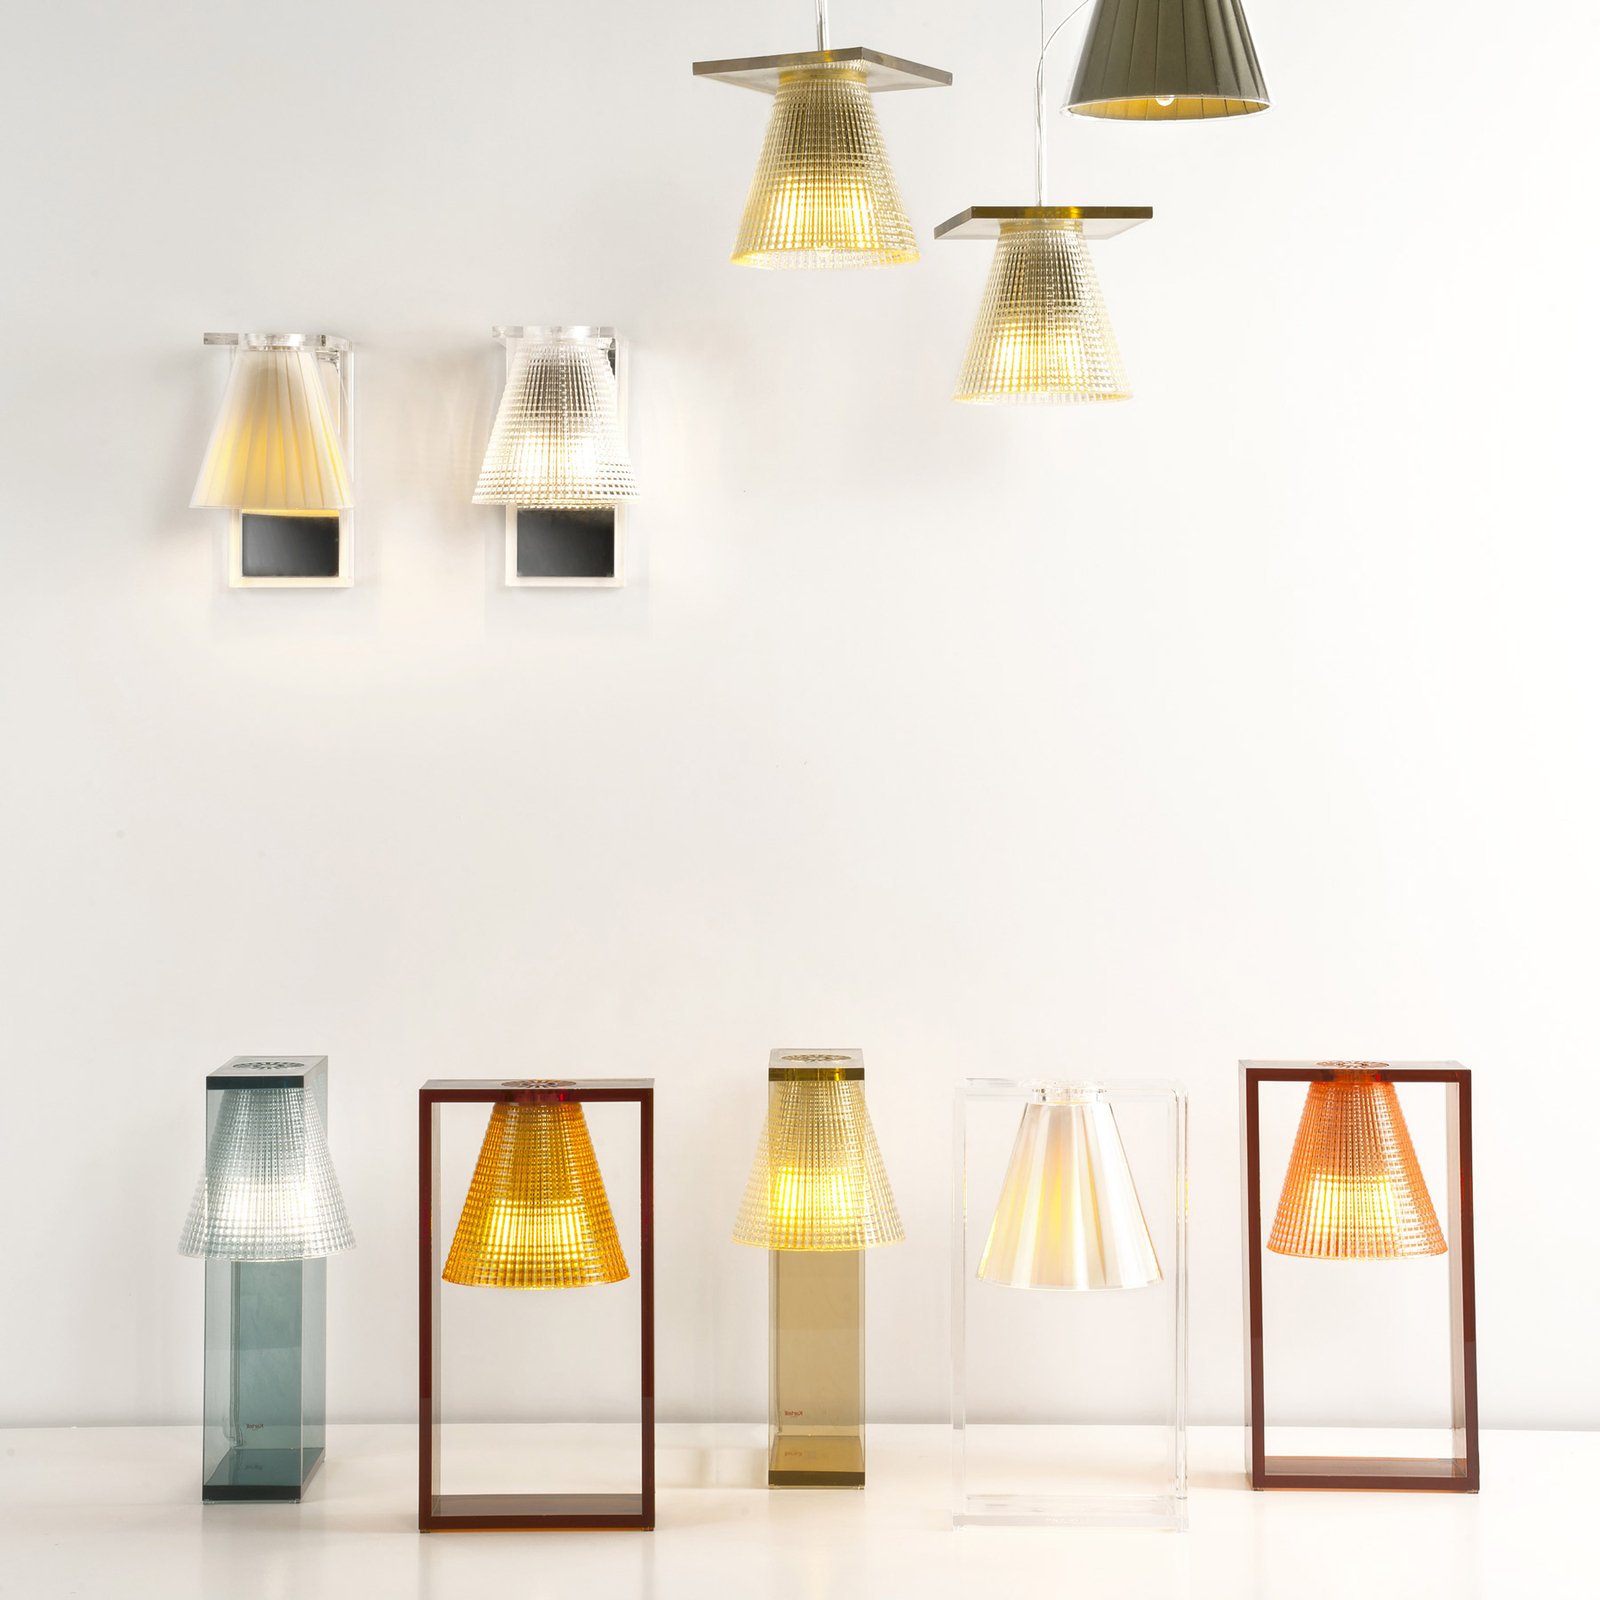 Kartell Light-Air wall light with textile shade